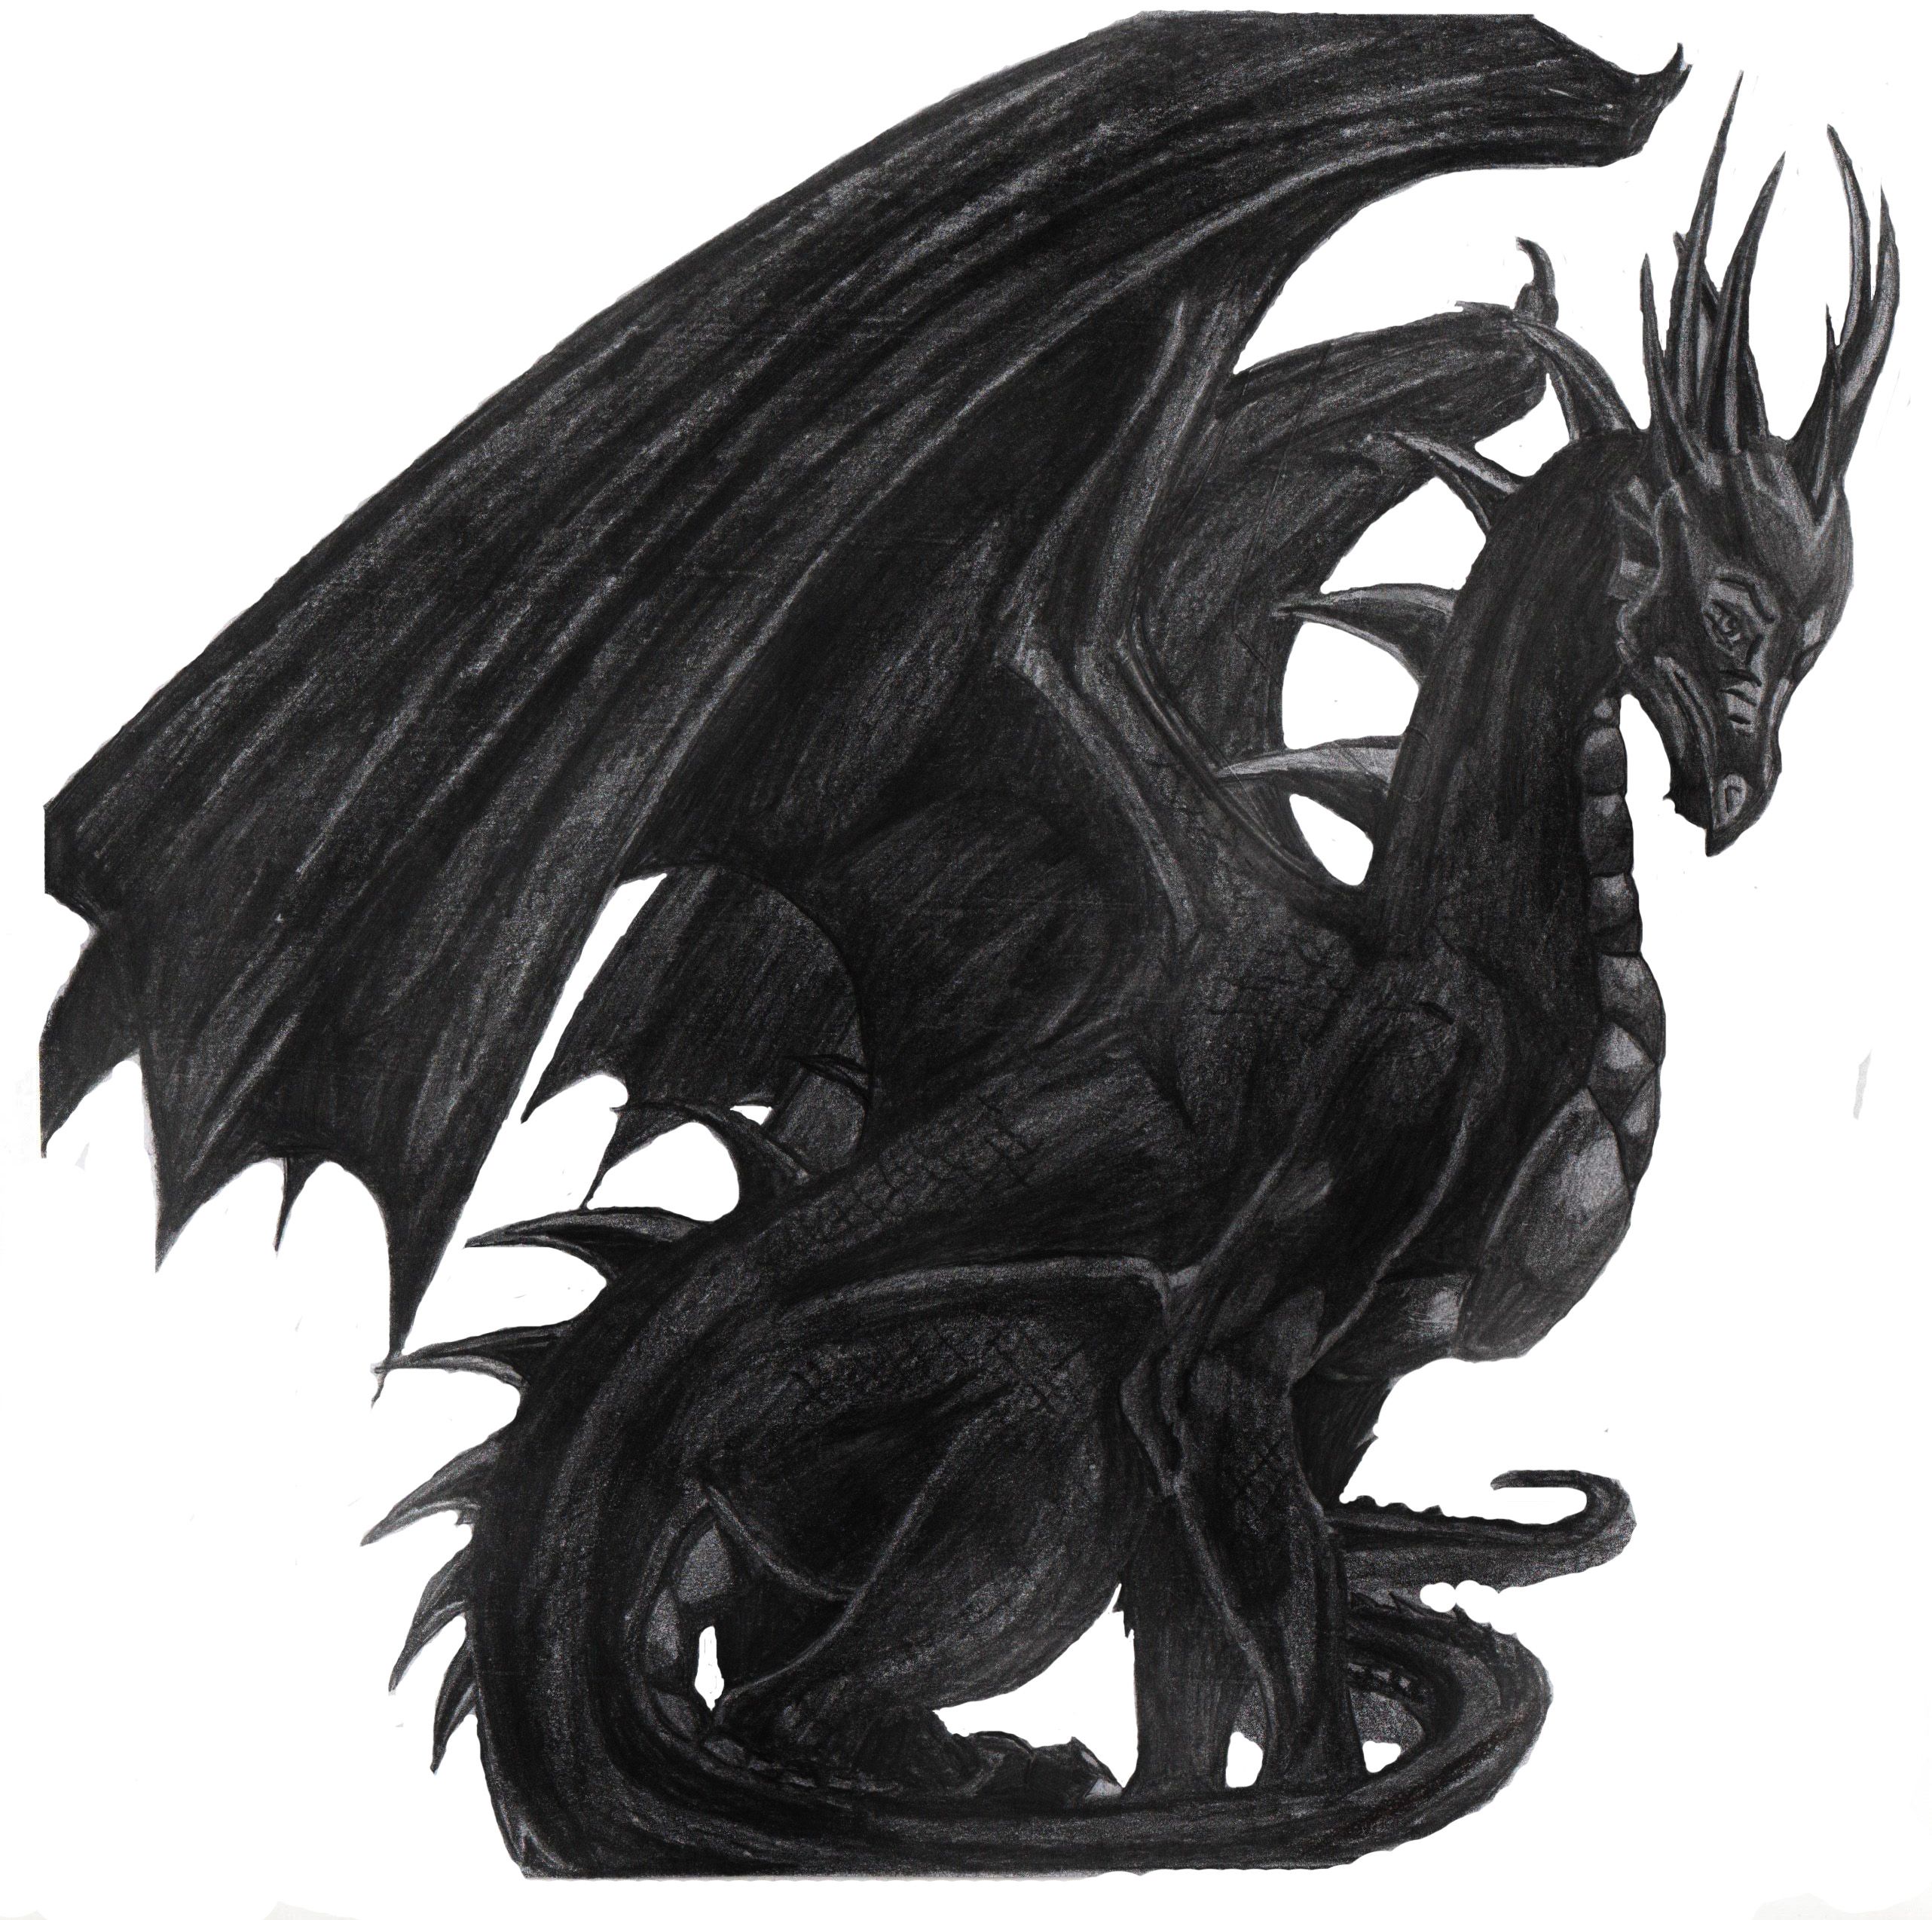 Black Dragon Background Wallpapers 10102 - Amazing Wallpaperz